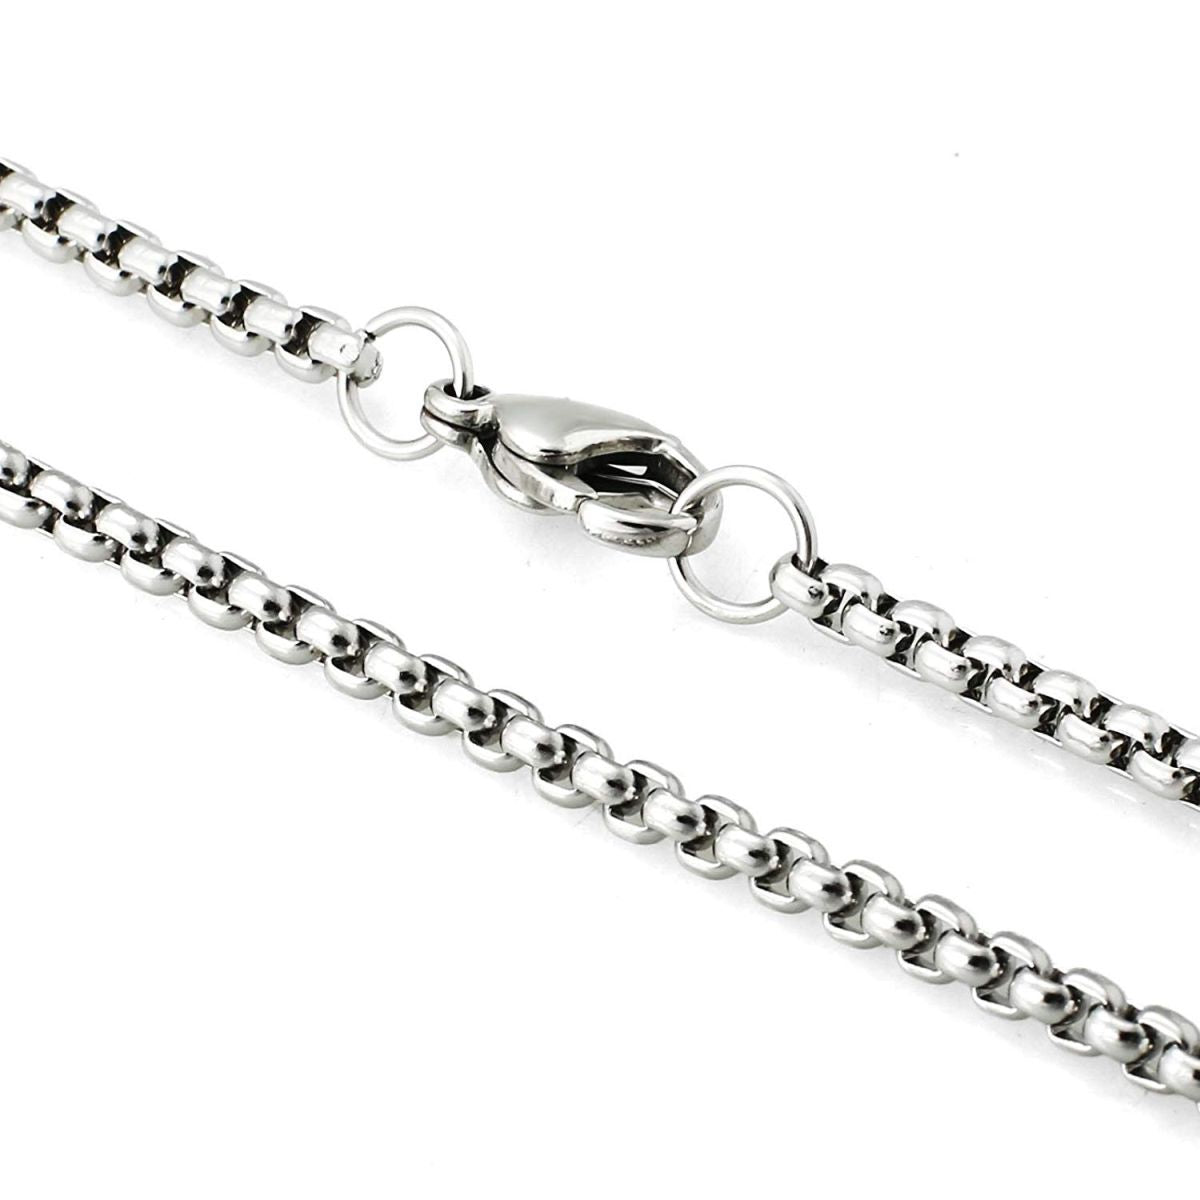 Padlock Chain Necklace, Unisex Stainless Steel Padlock Charm Necklace, Stainless Steel Link Chain